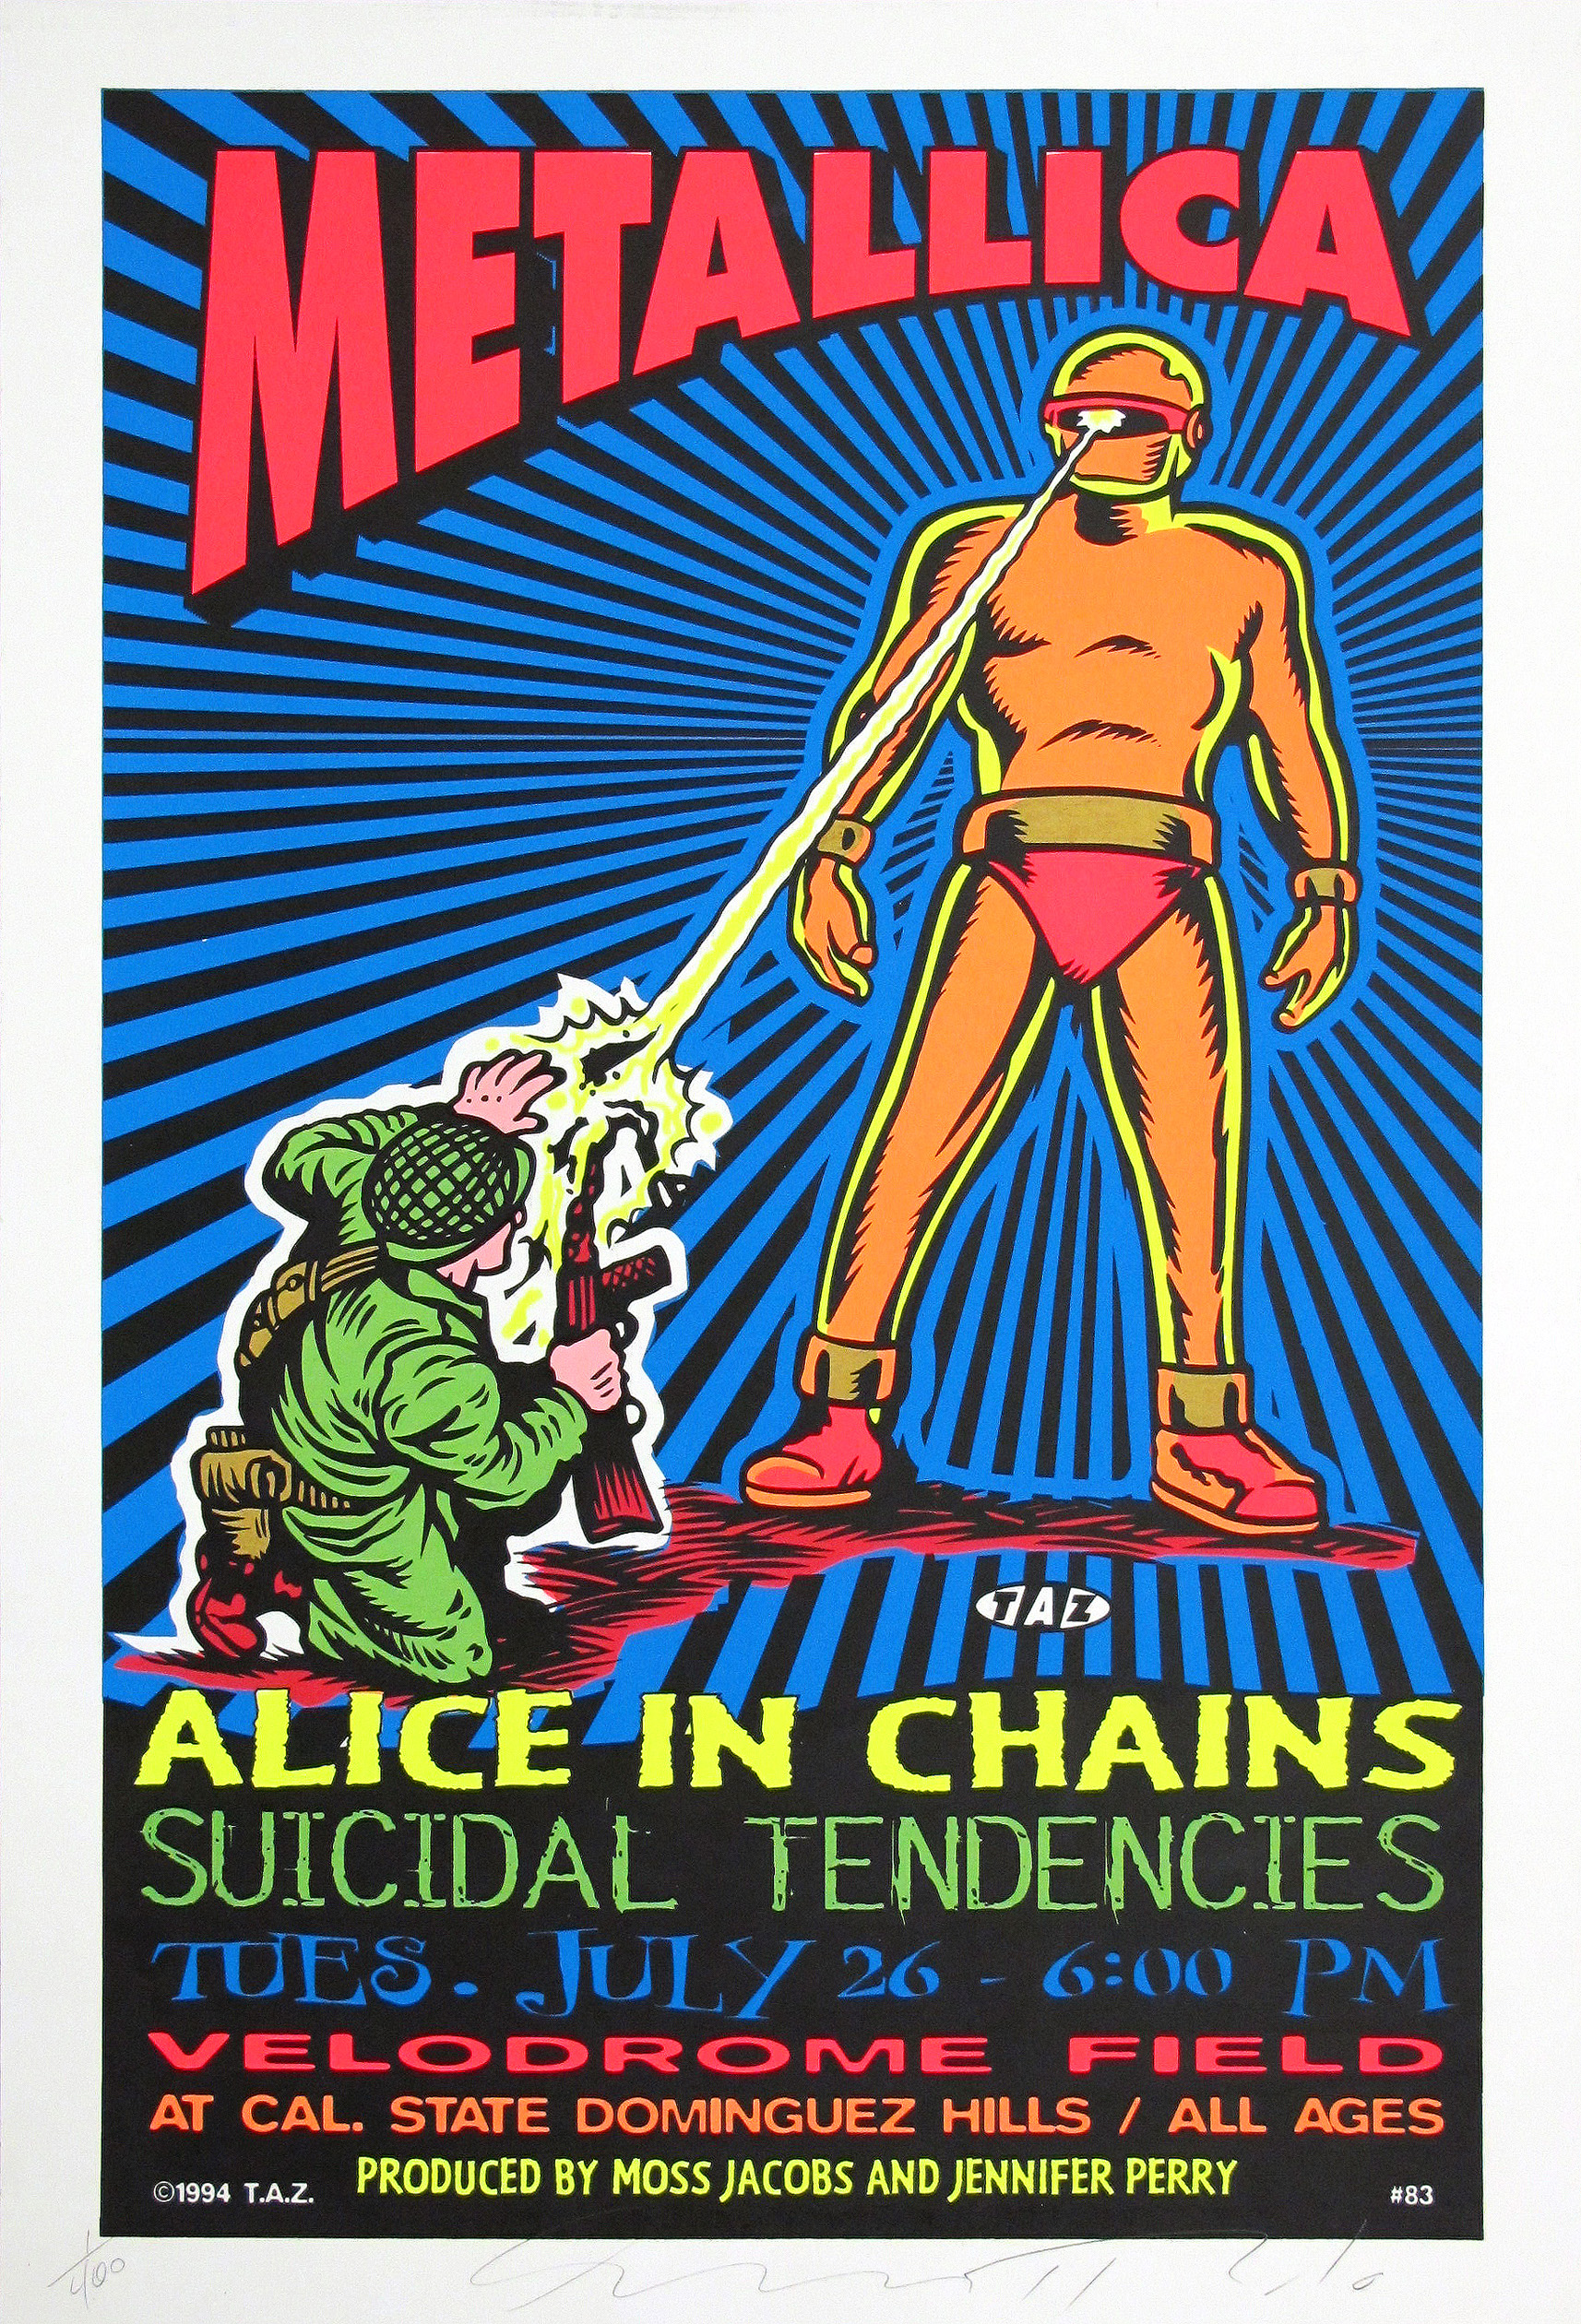 Metallica and Alice In Chains Original Concert Poster